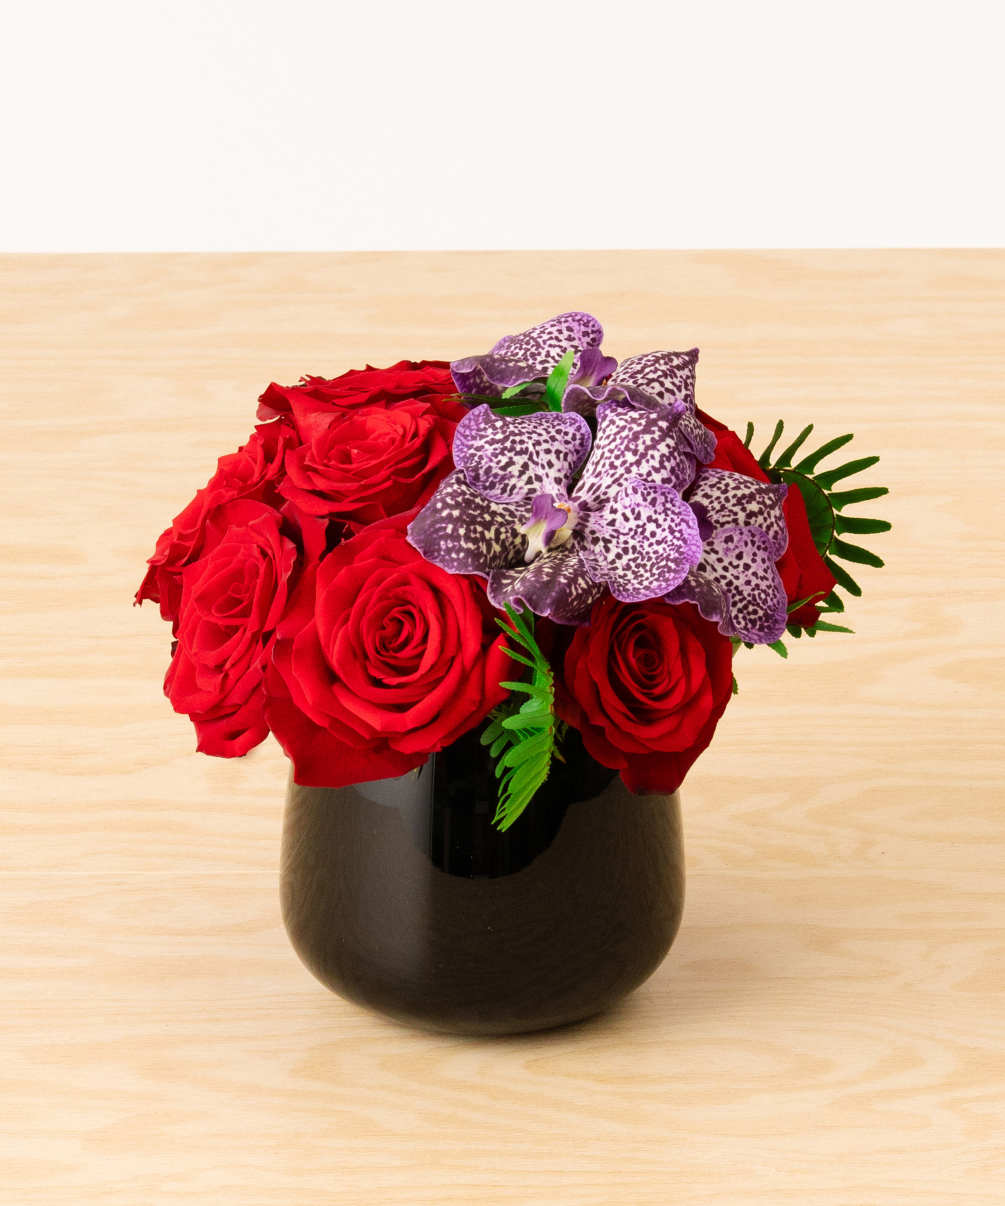 A lush mound of red roses boast purple vanda orchids designed in